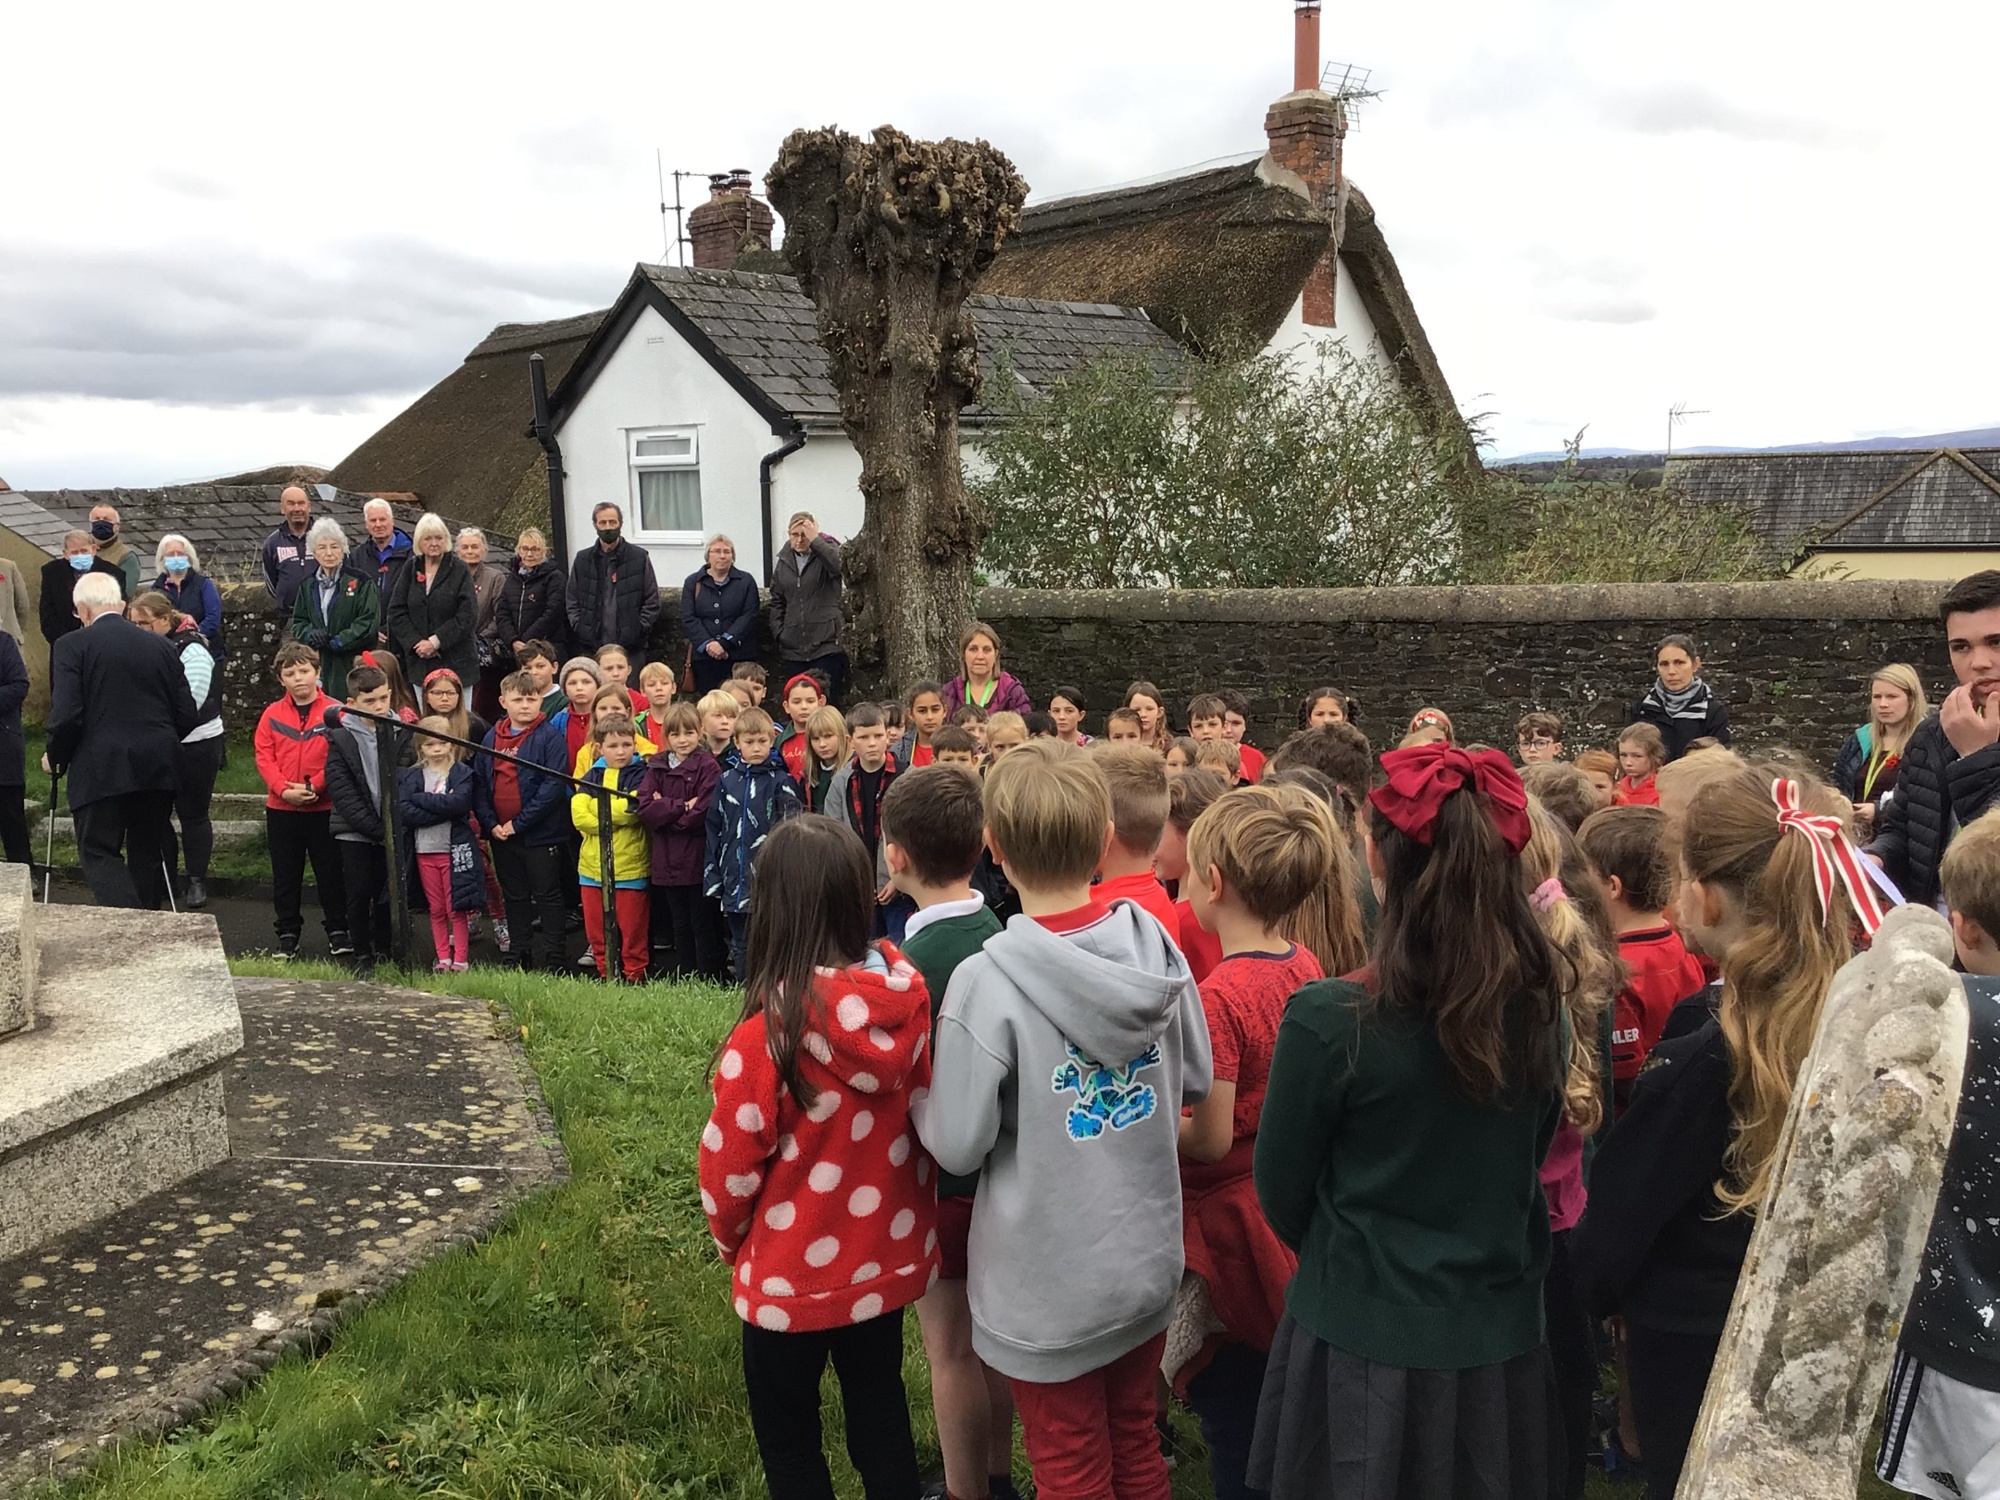 School children paying respects at war memorial on Remembrance Day